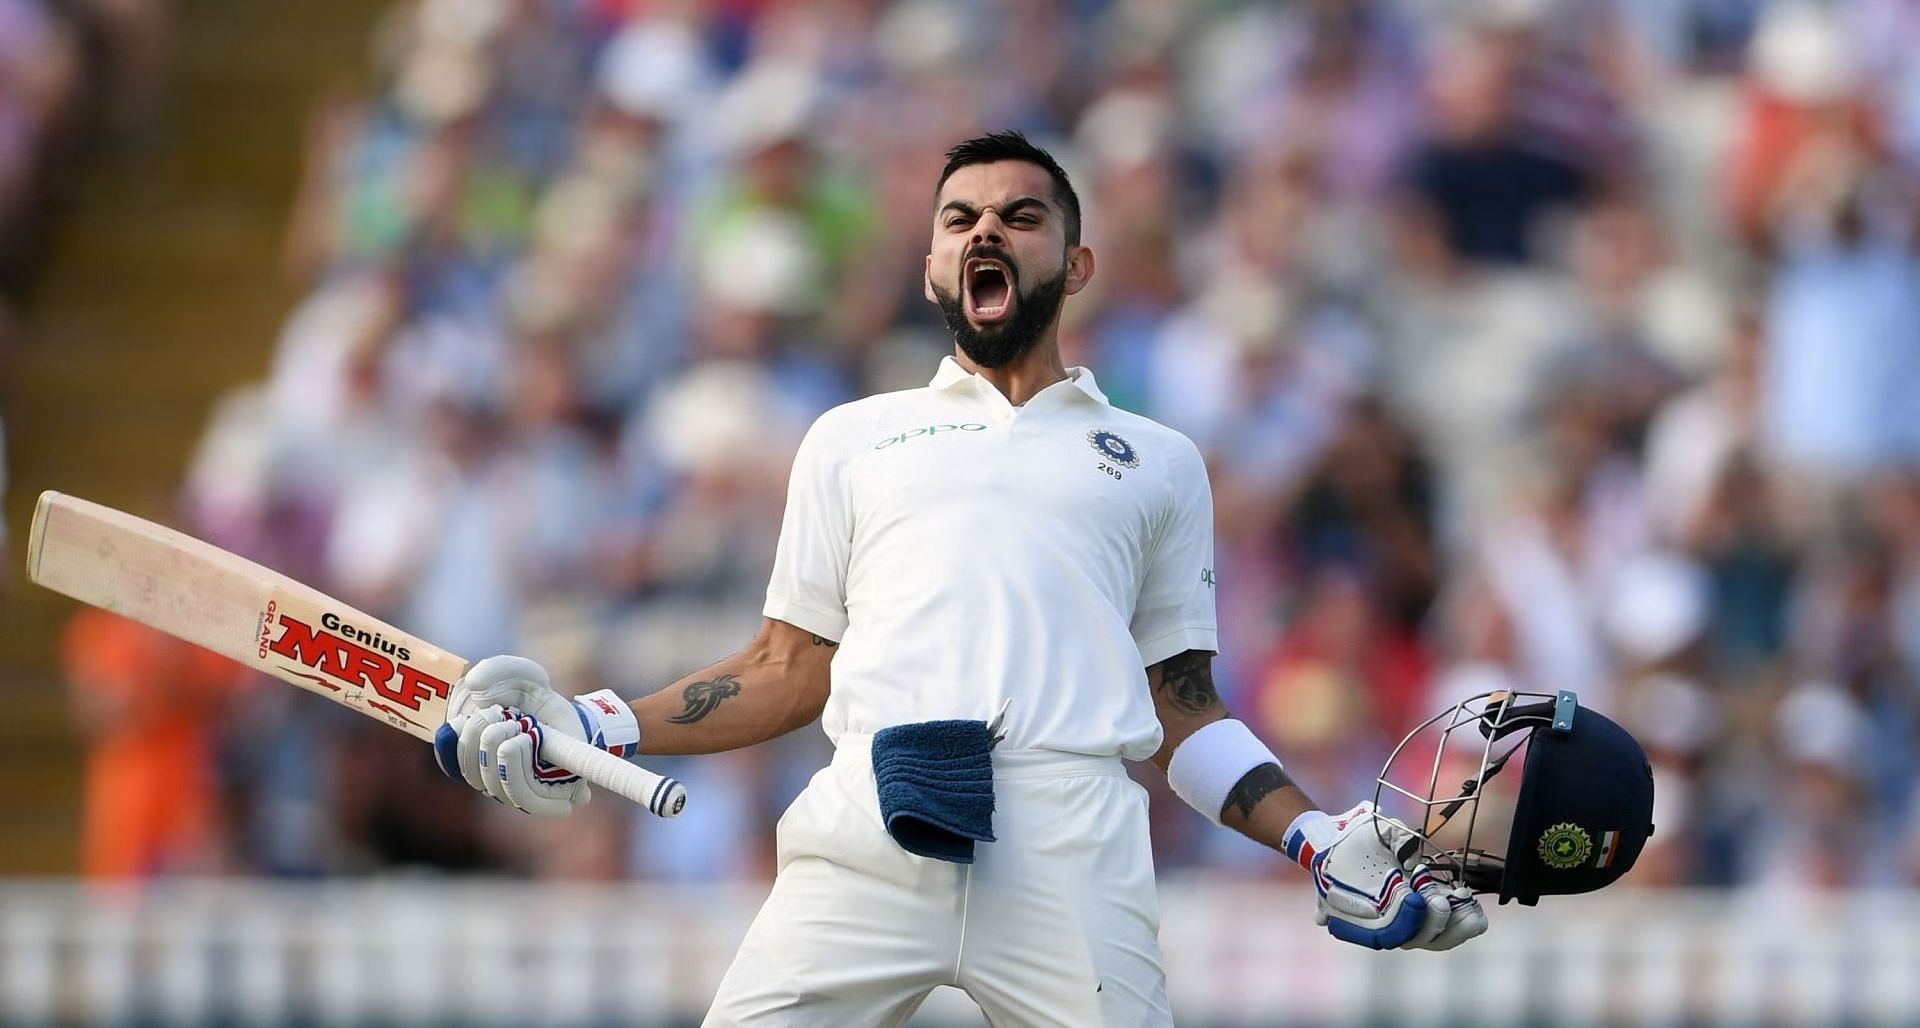 Kohli laid the demons of a disastrous 2014 tour of England to rest with a specular batting effort during the 2018 series. He amassed 593 runs in 10 innings at an average of 59.30, with two hundreds and three fifties. (Pic: Getty Images)